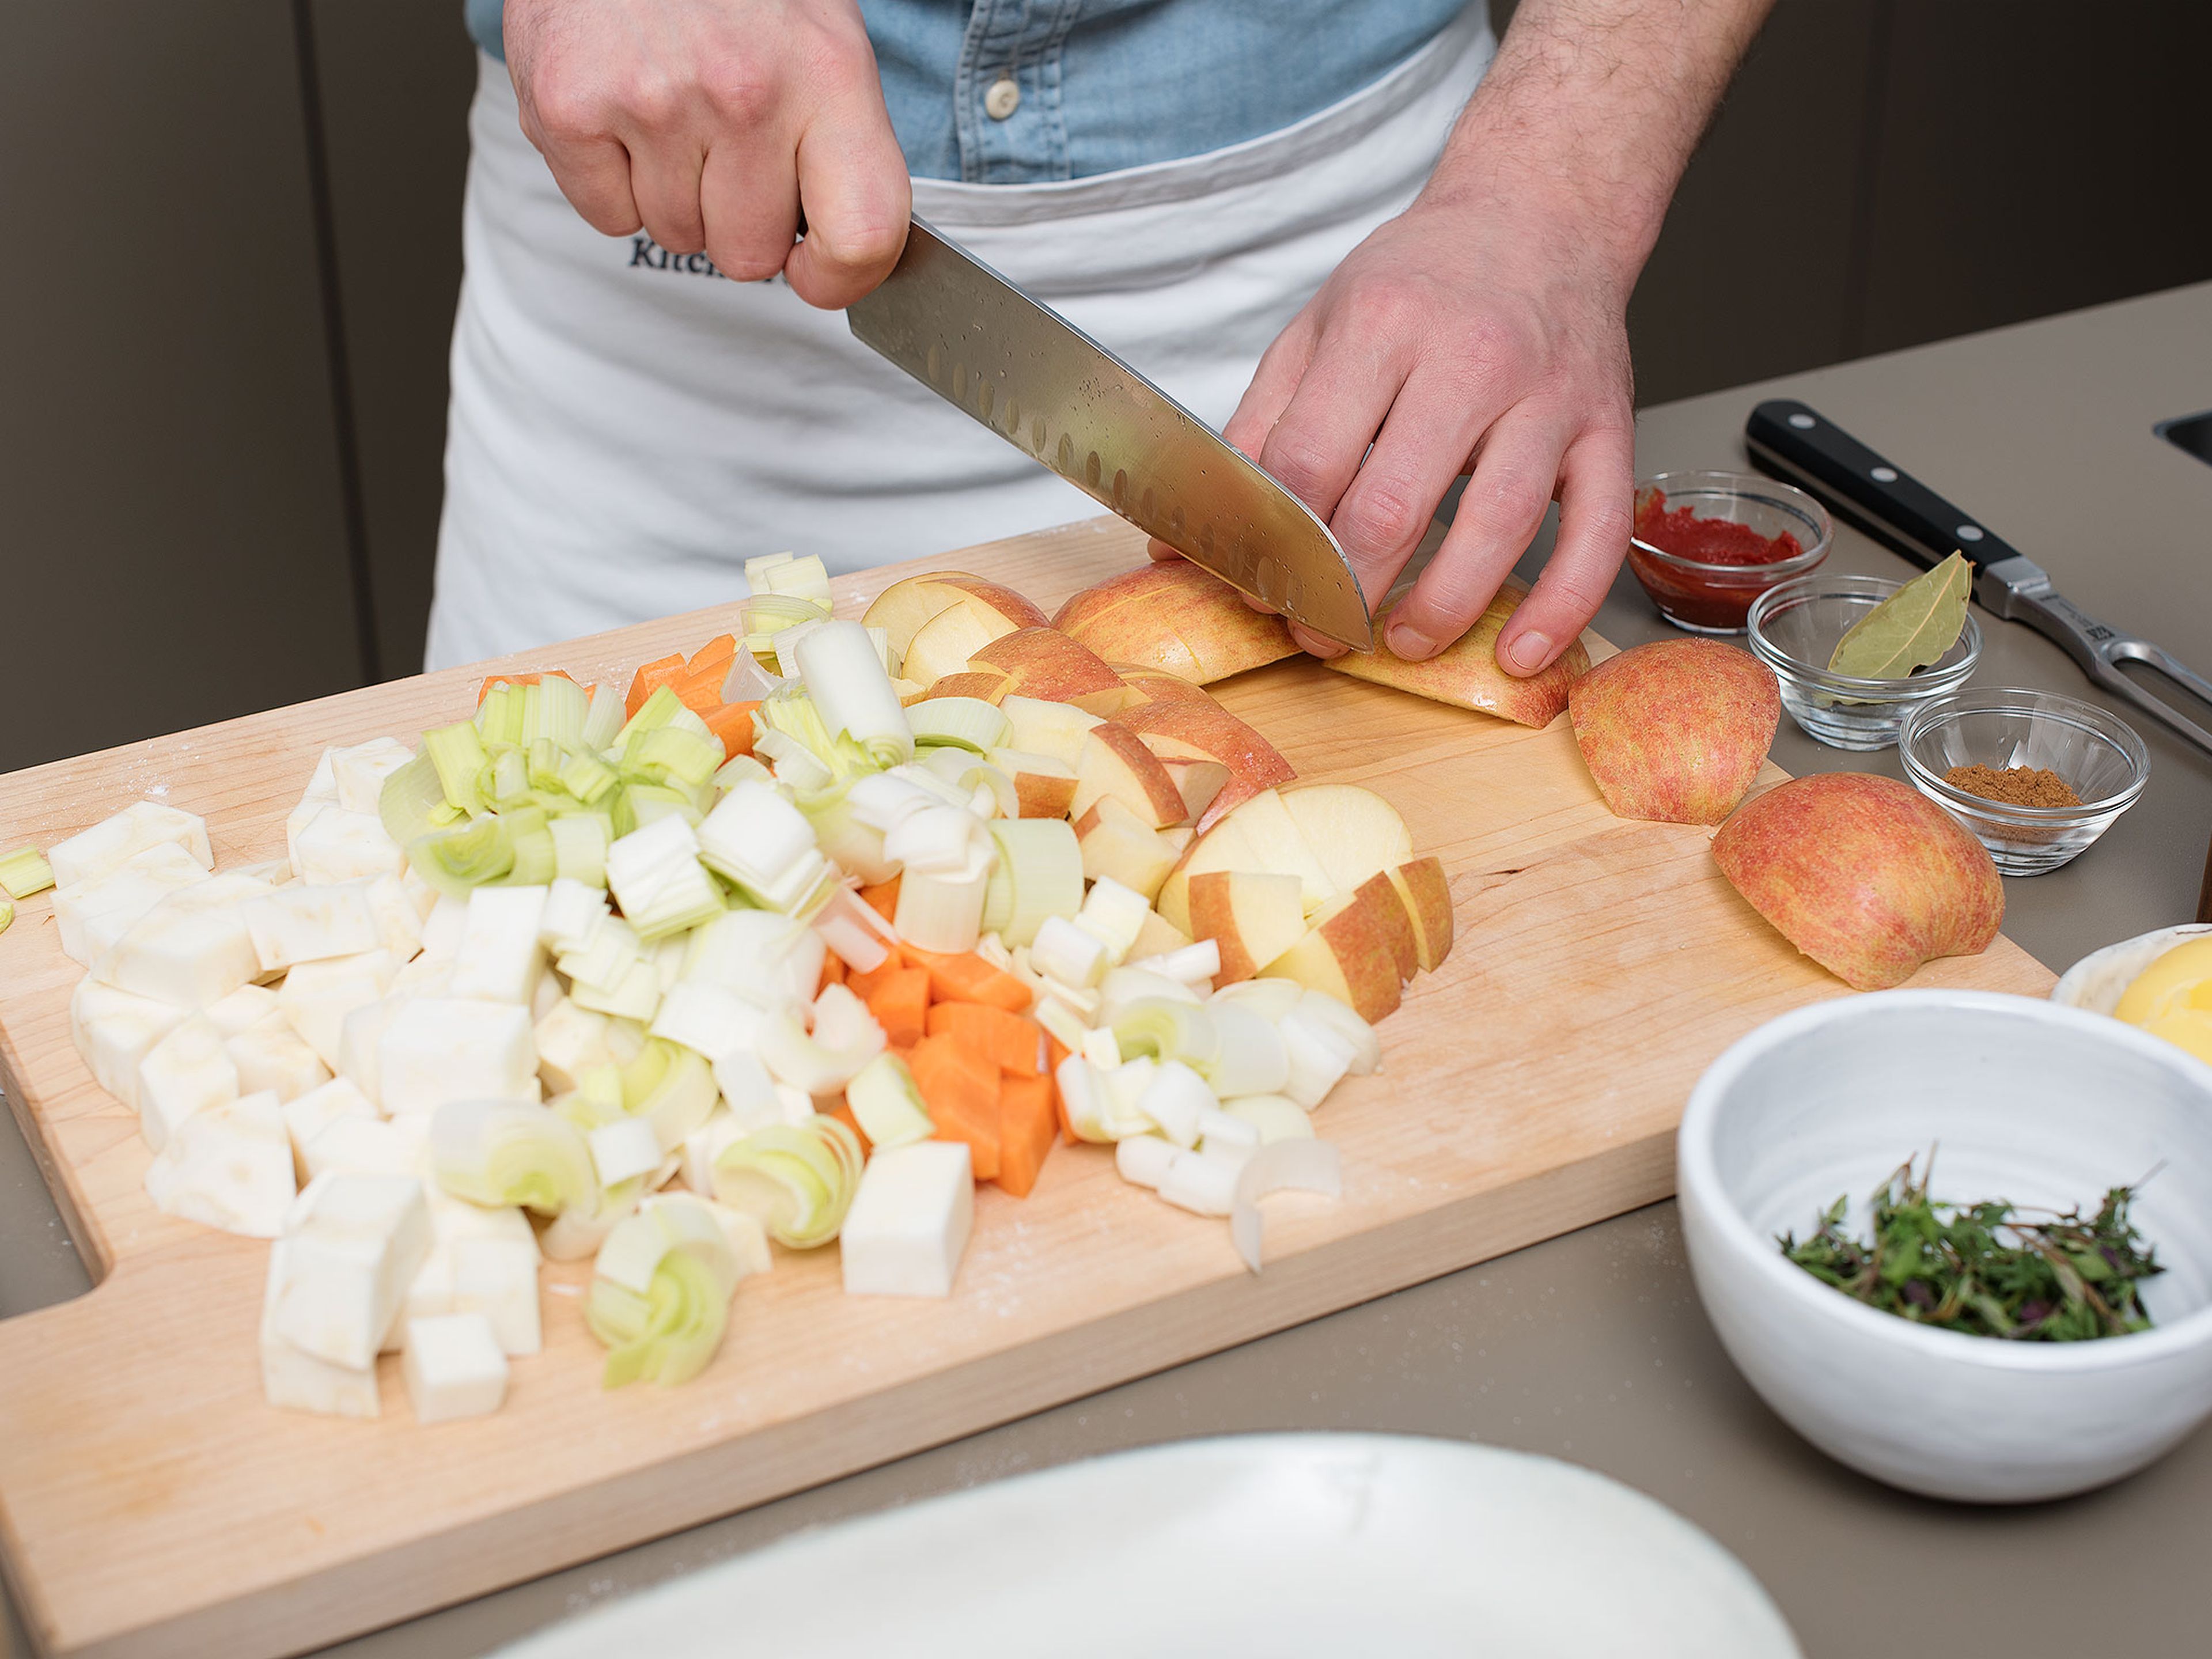 Preheat oven to 120°C/250°F. Make incisions at the joint-end of the goose legs. Season with salt, then set aside. Peel and dice celery root. Peel carrots and cut into bite-sized pieces. Cut leek into 1.5-cm/ 0.5-in. slices. Peel and roughly chop onions. Cut a part of the apples into bite-sized pieces.